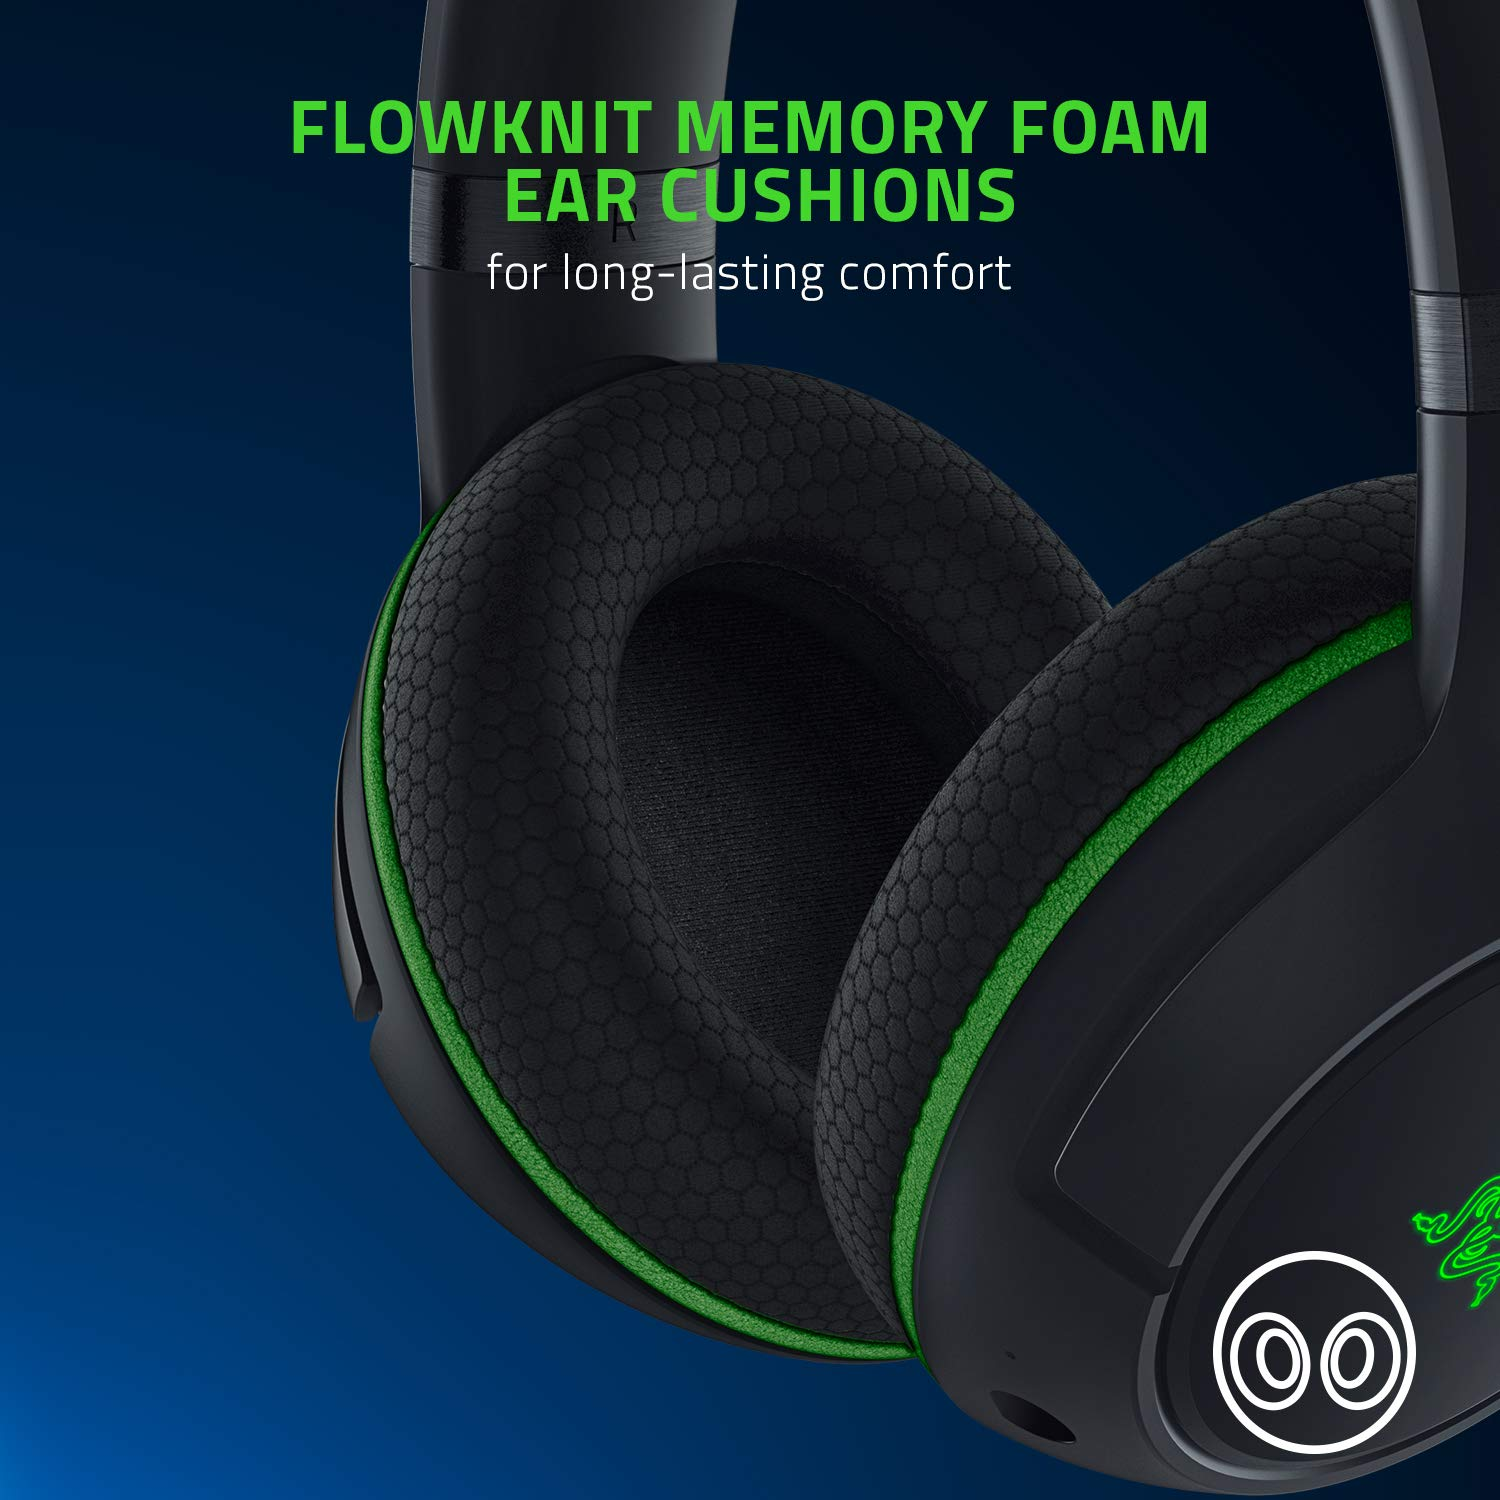 Review of the Razer Kaira Pro Xbox headset, which combines Bluetooth and Xbox wireless.